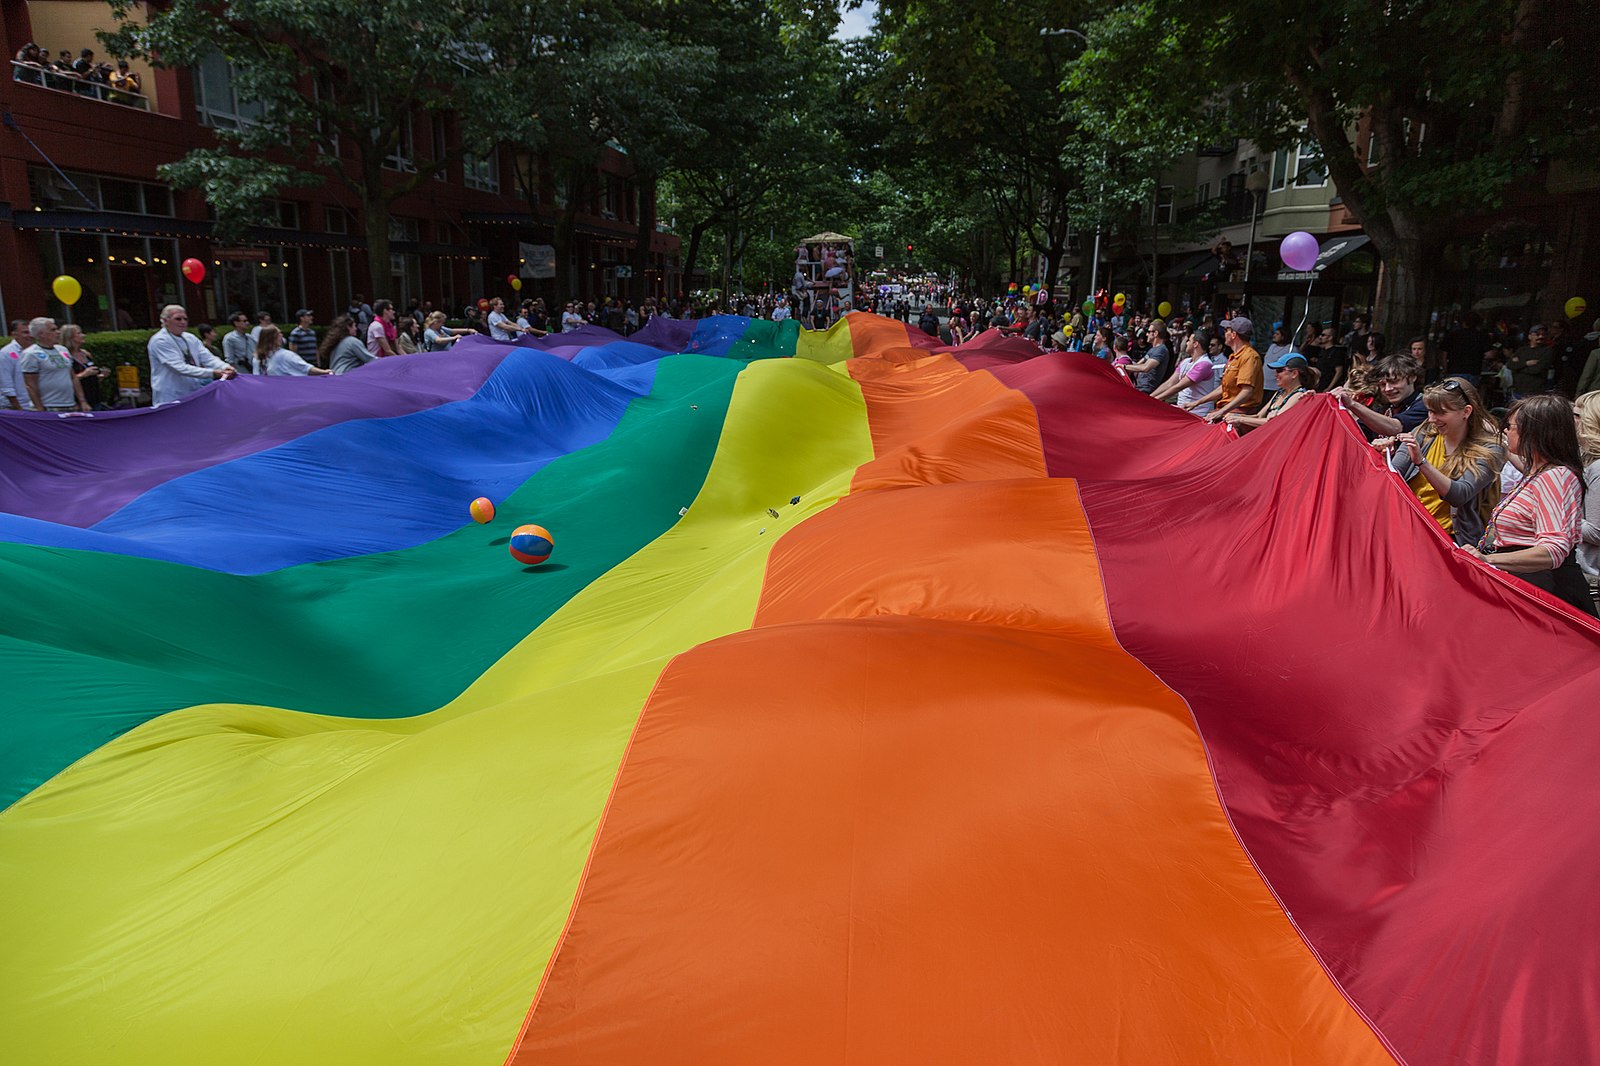 People standing on either side of a tree-lined street hold up a giant rainbow Pride flag that fills the whole street